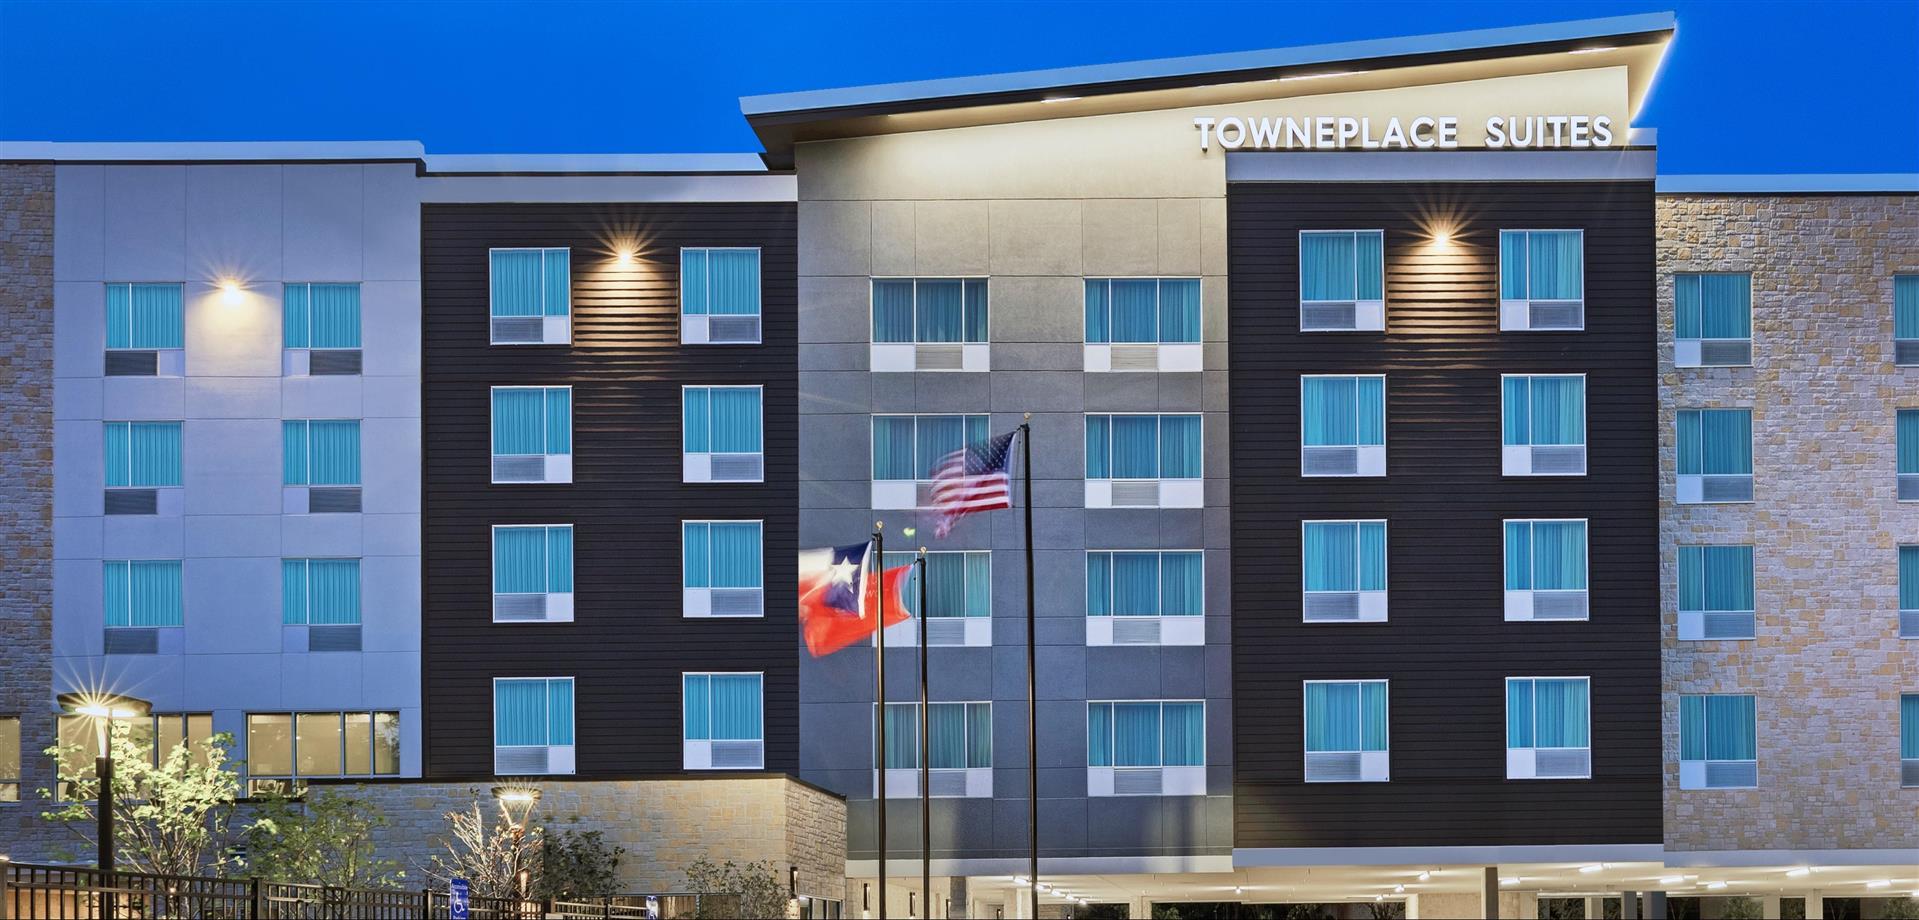 TownePlace Suites Austin Northwest/The Domain Area in Austin, TX